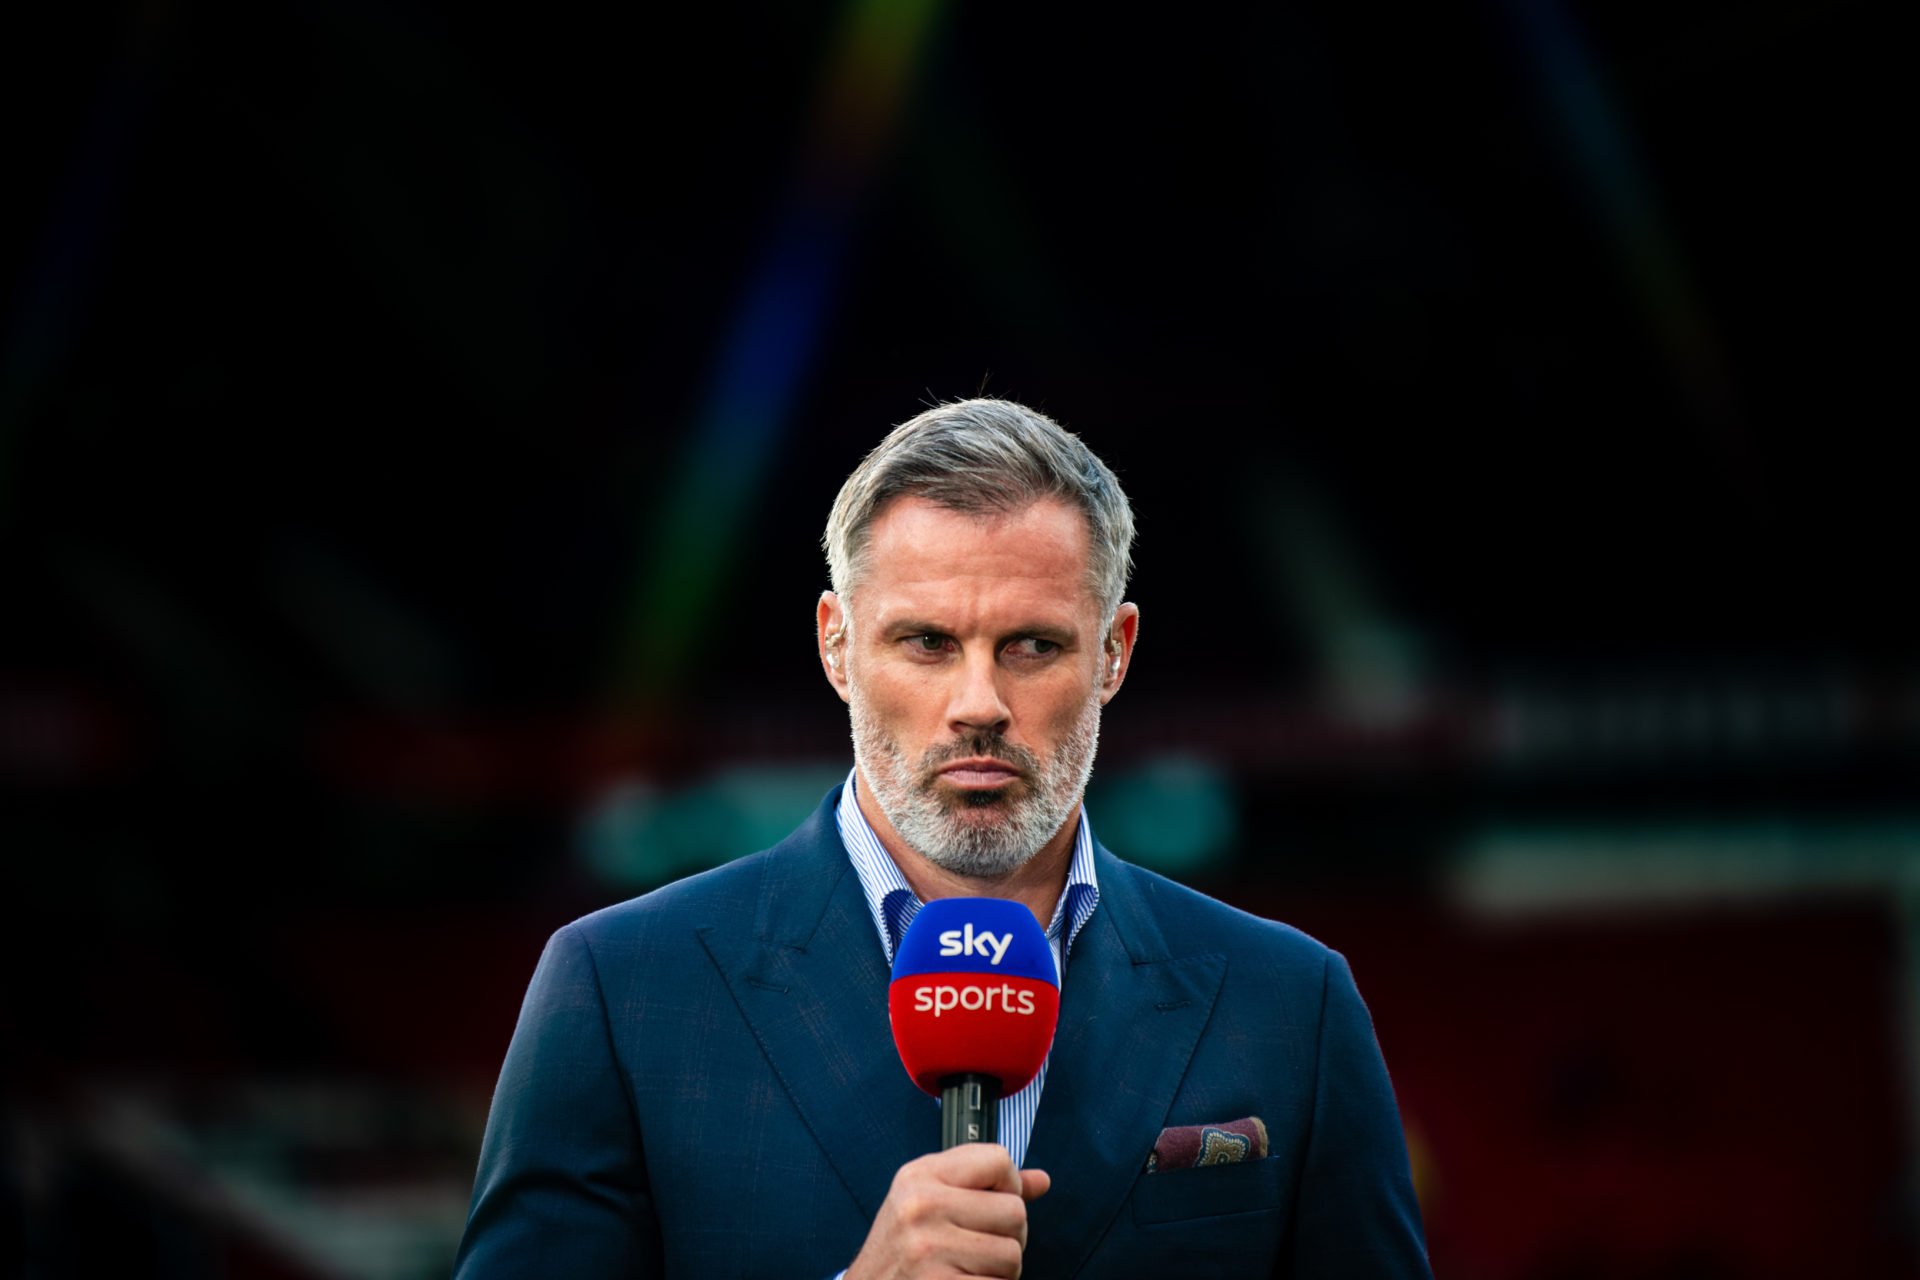 England World Cup star Declan Rice one of the best players in world football according to Jamie Carragher